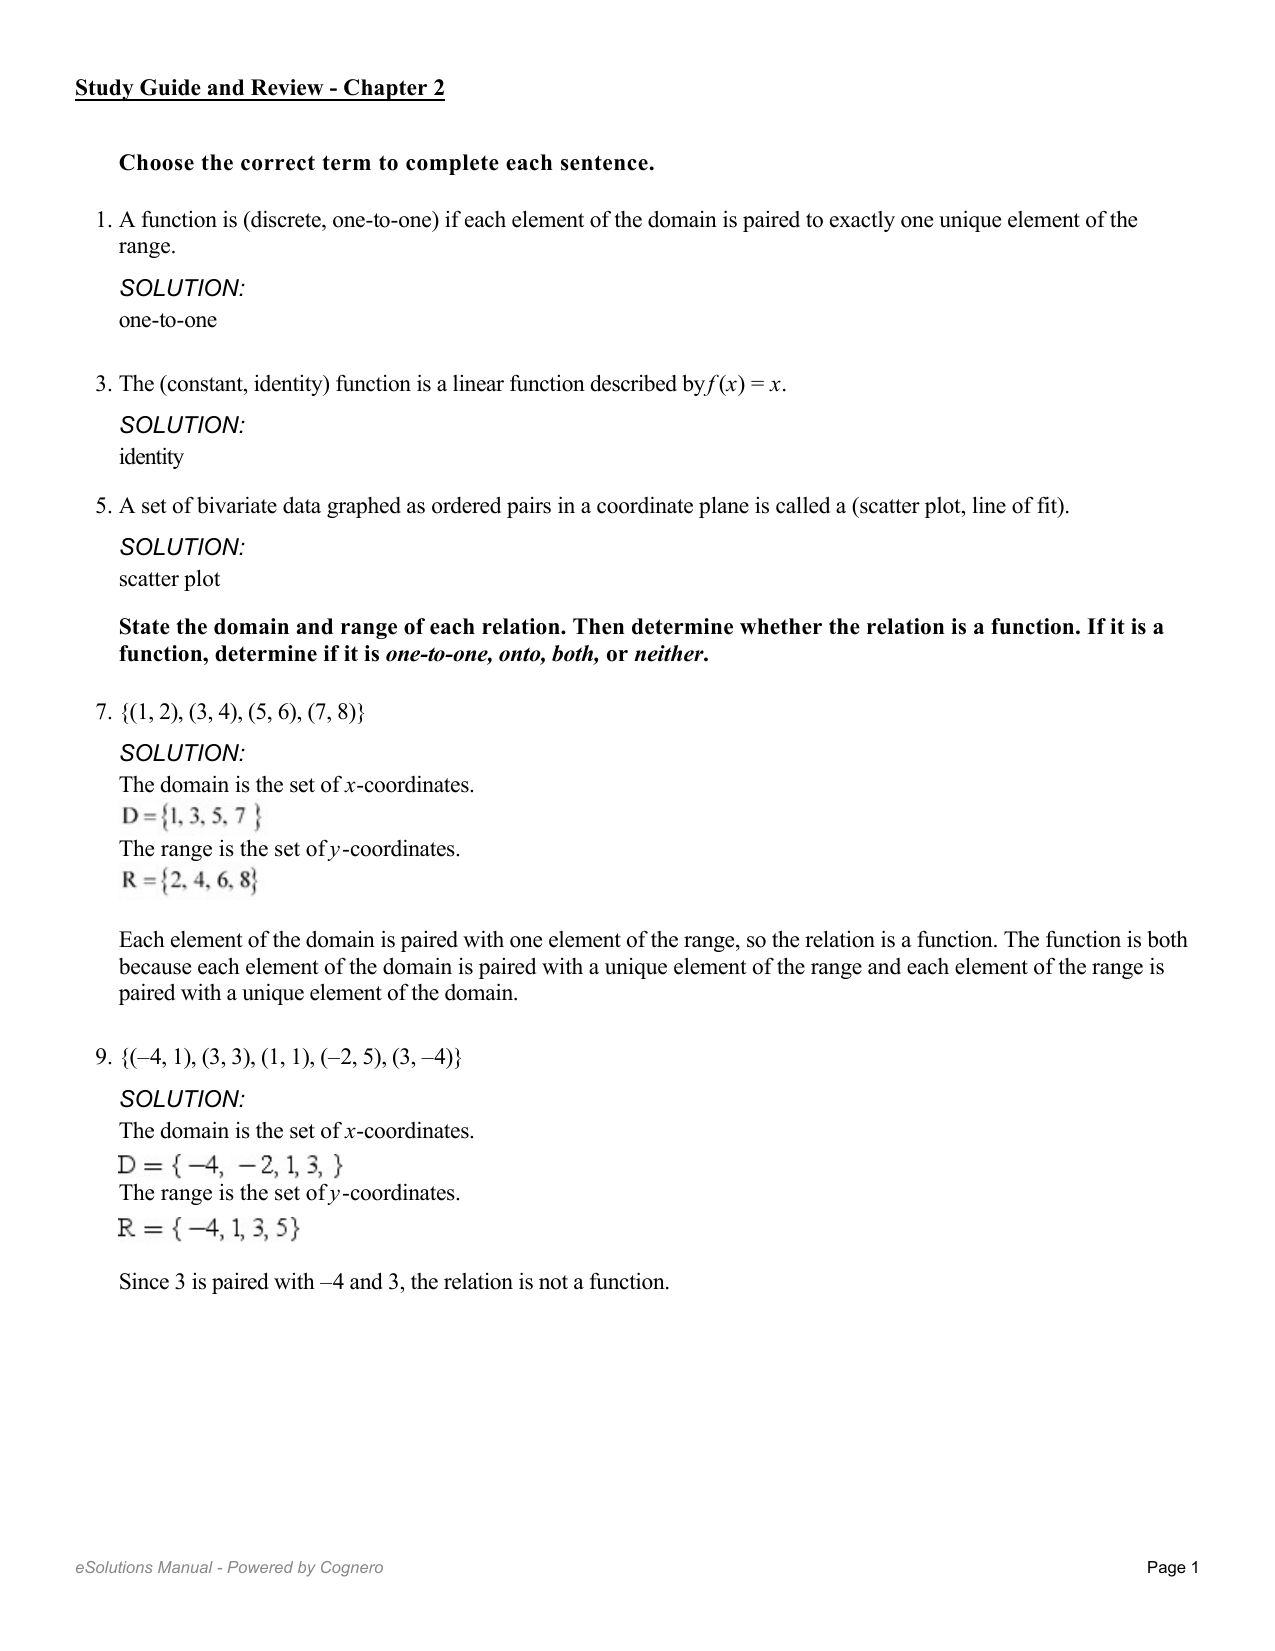 Algebra 1 Final Exam Study Guide Powered By Cognero - Study Poster